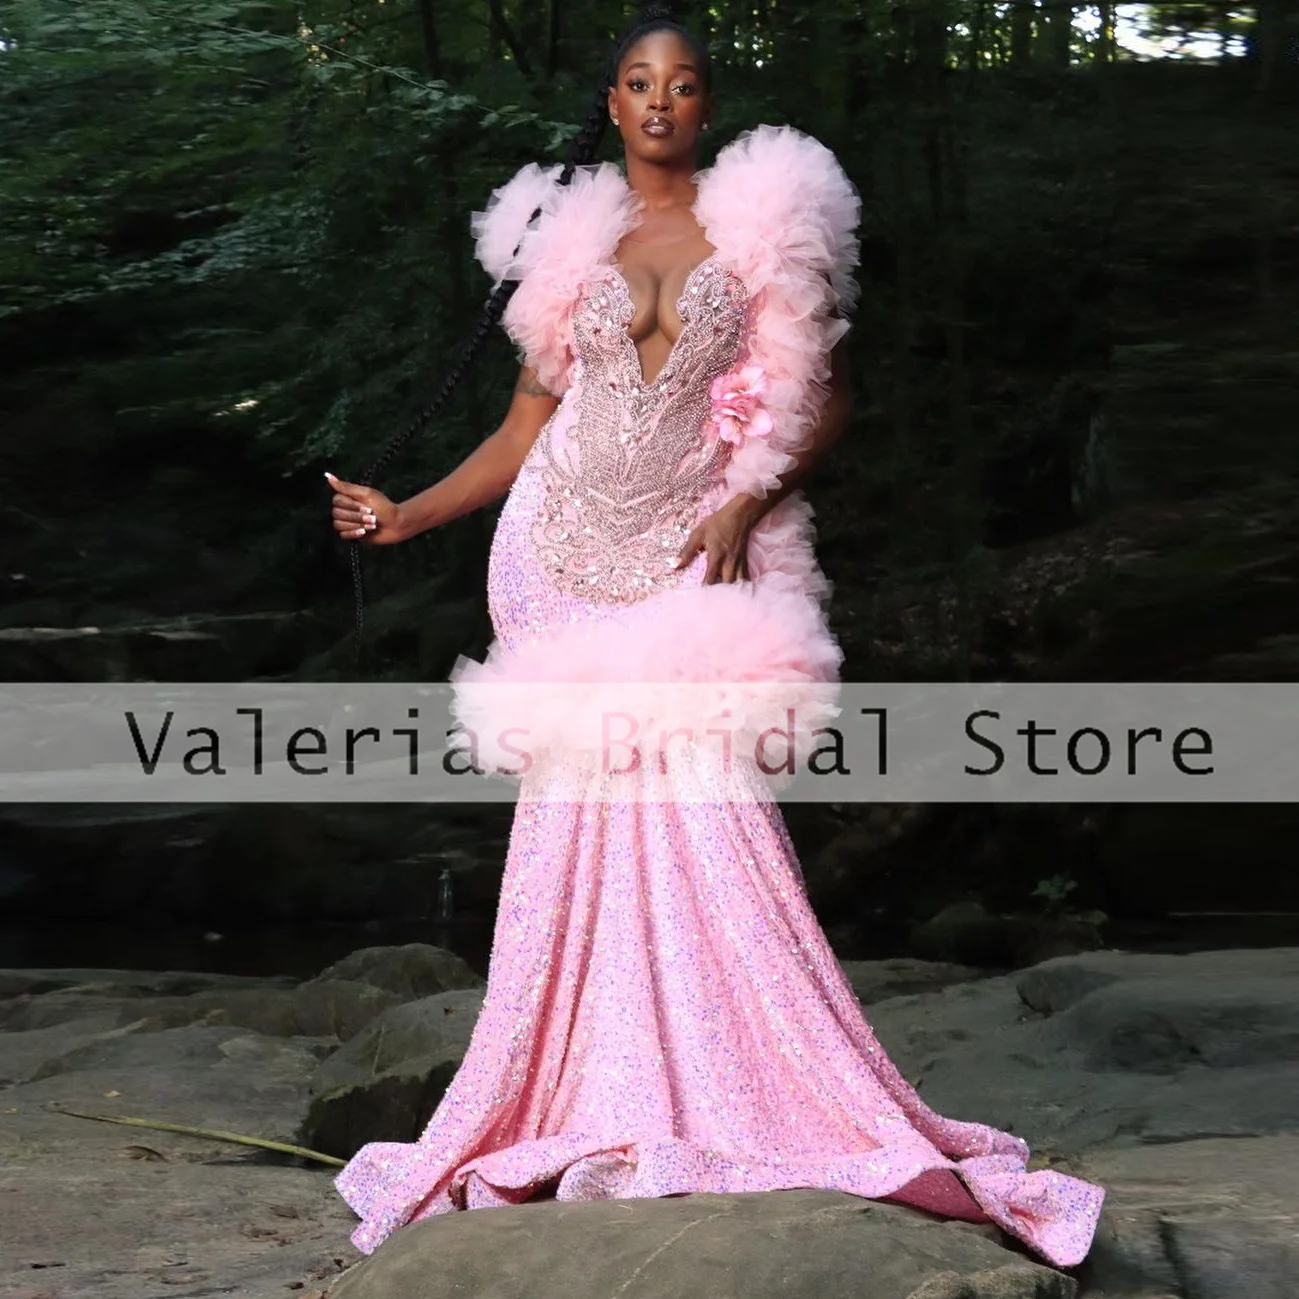 

Sparkly Pink Mermaid Prom Dress Sequined Ruffles A-Line Backless Sexy Eening Dresses Vestidos Para Mujer Elegantes y Bonitos